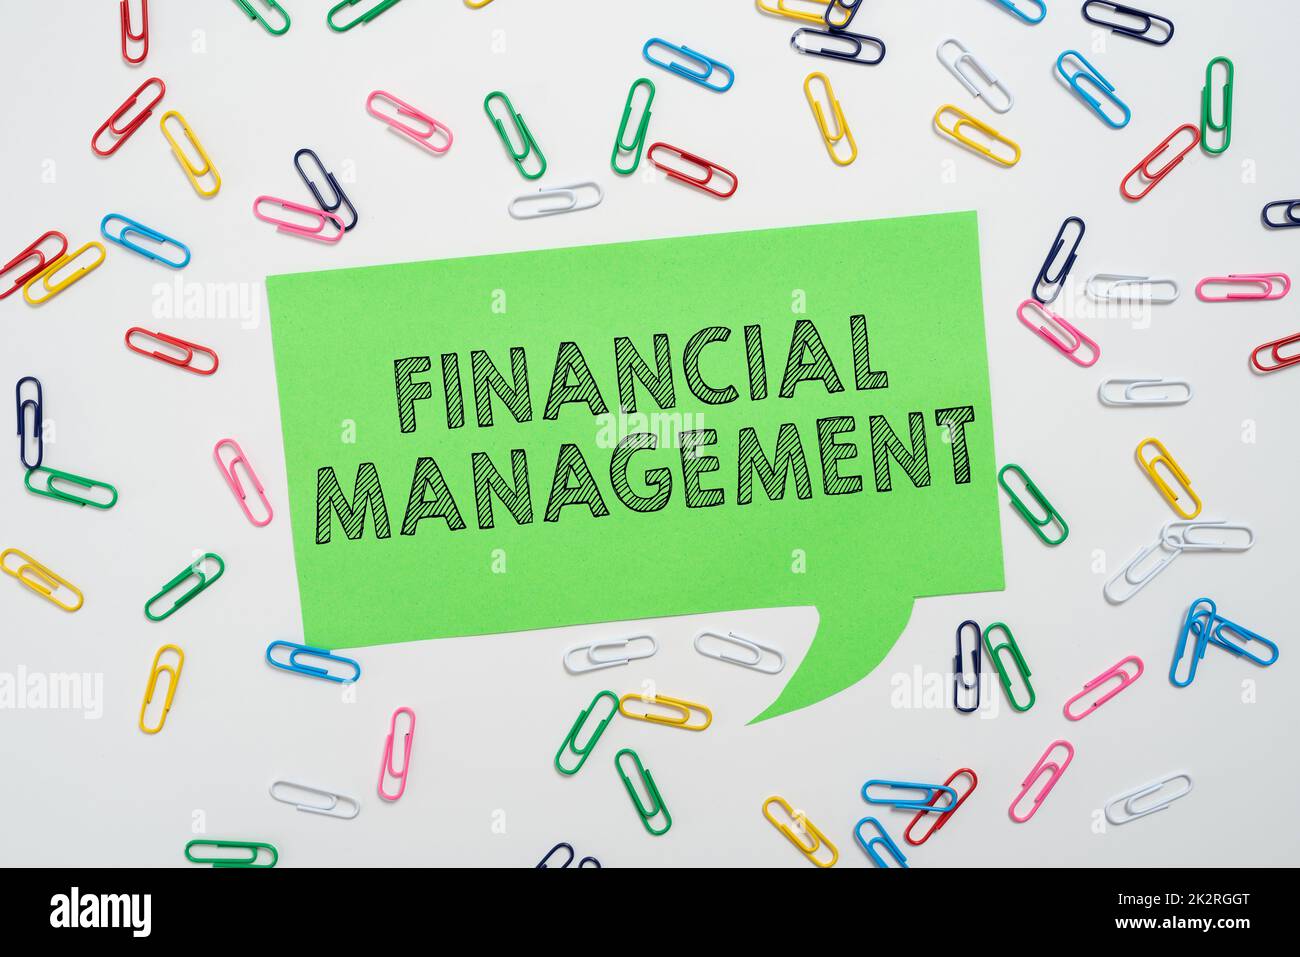 Writing displaying text Financial Management. Internet Concept efficient and effective way to Manage Money and Funds Stock Photo